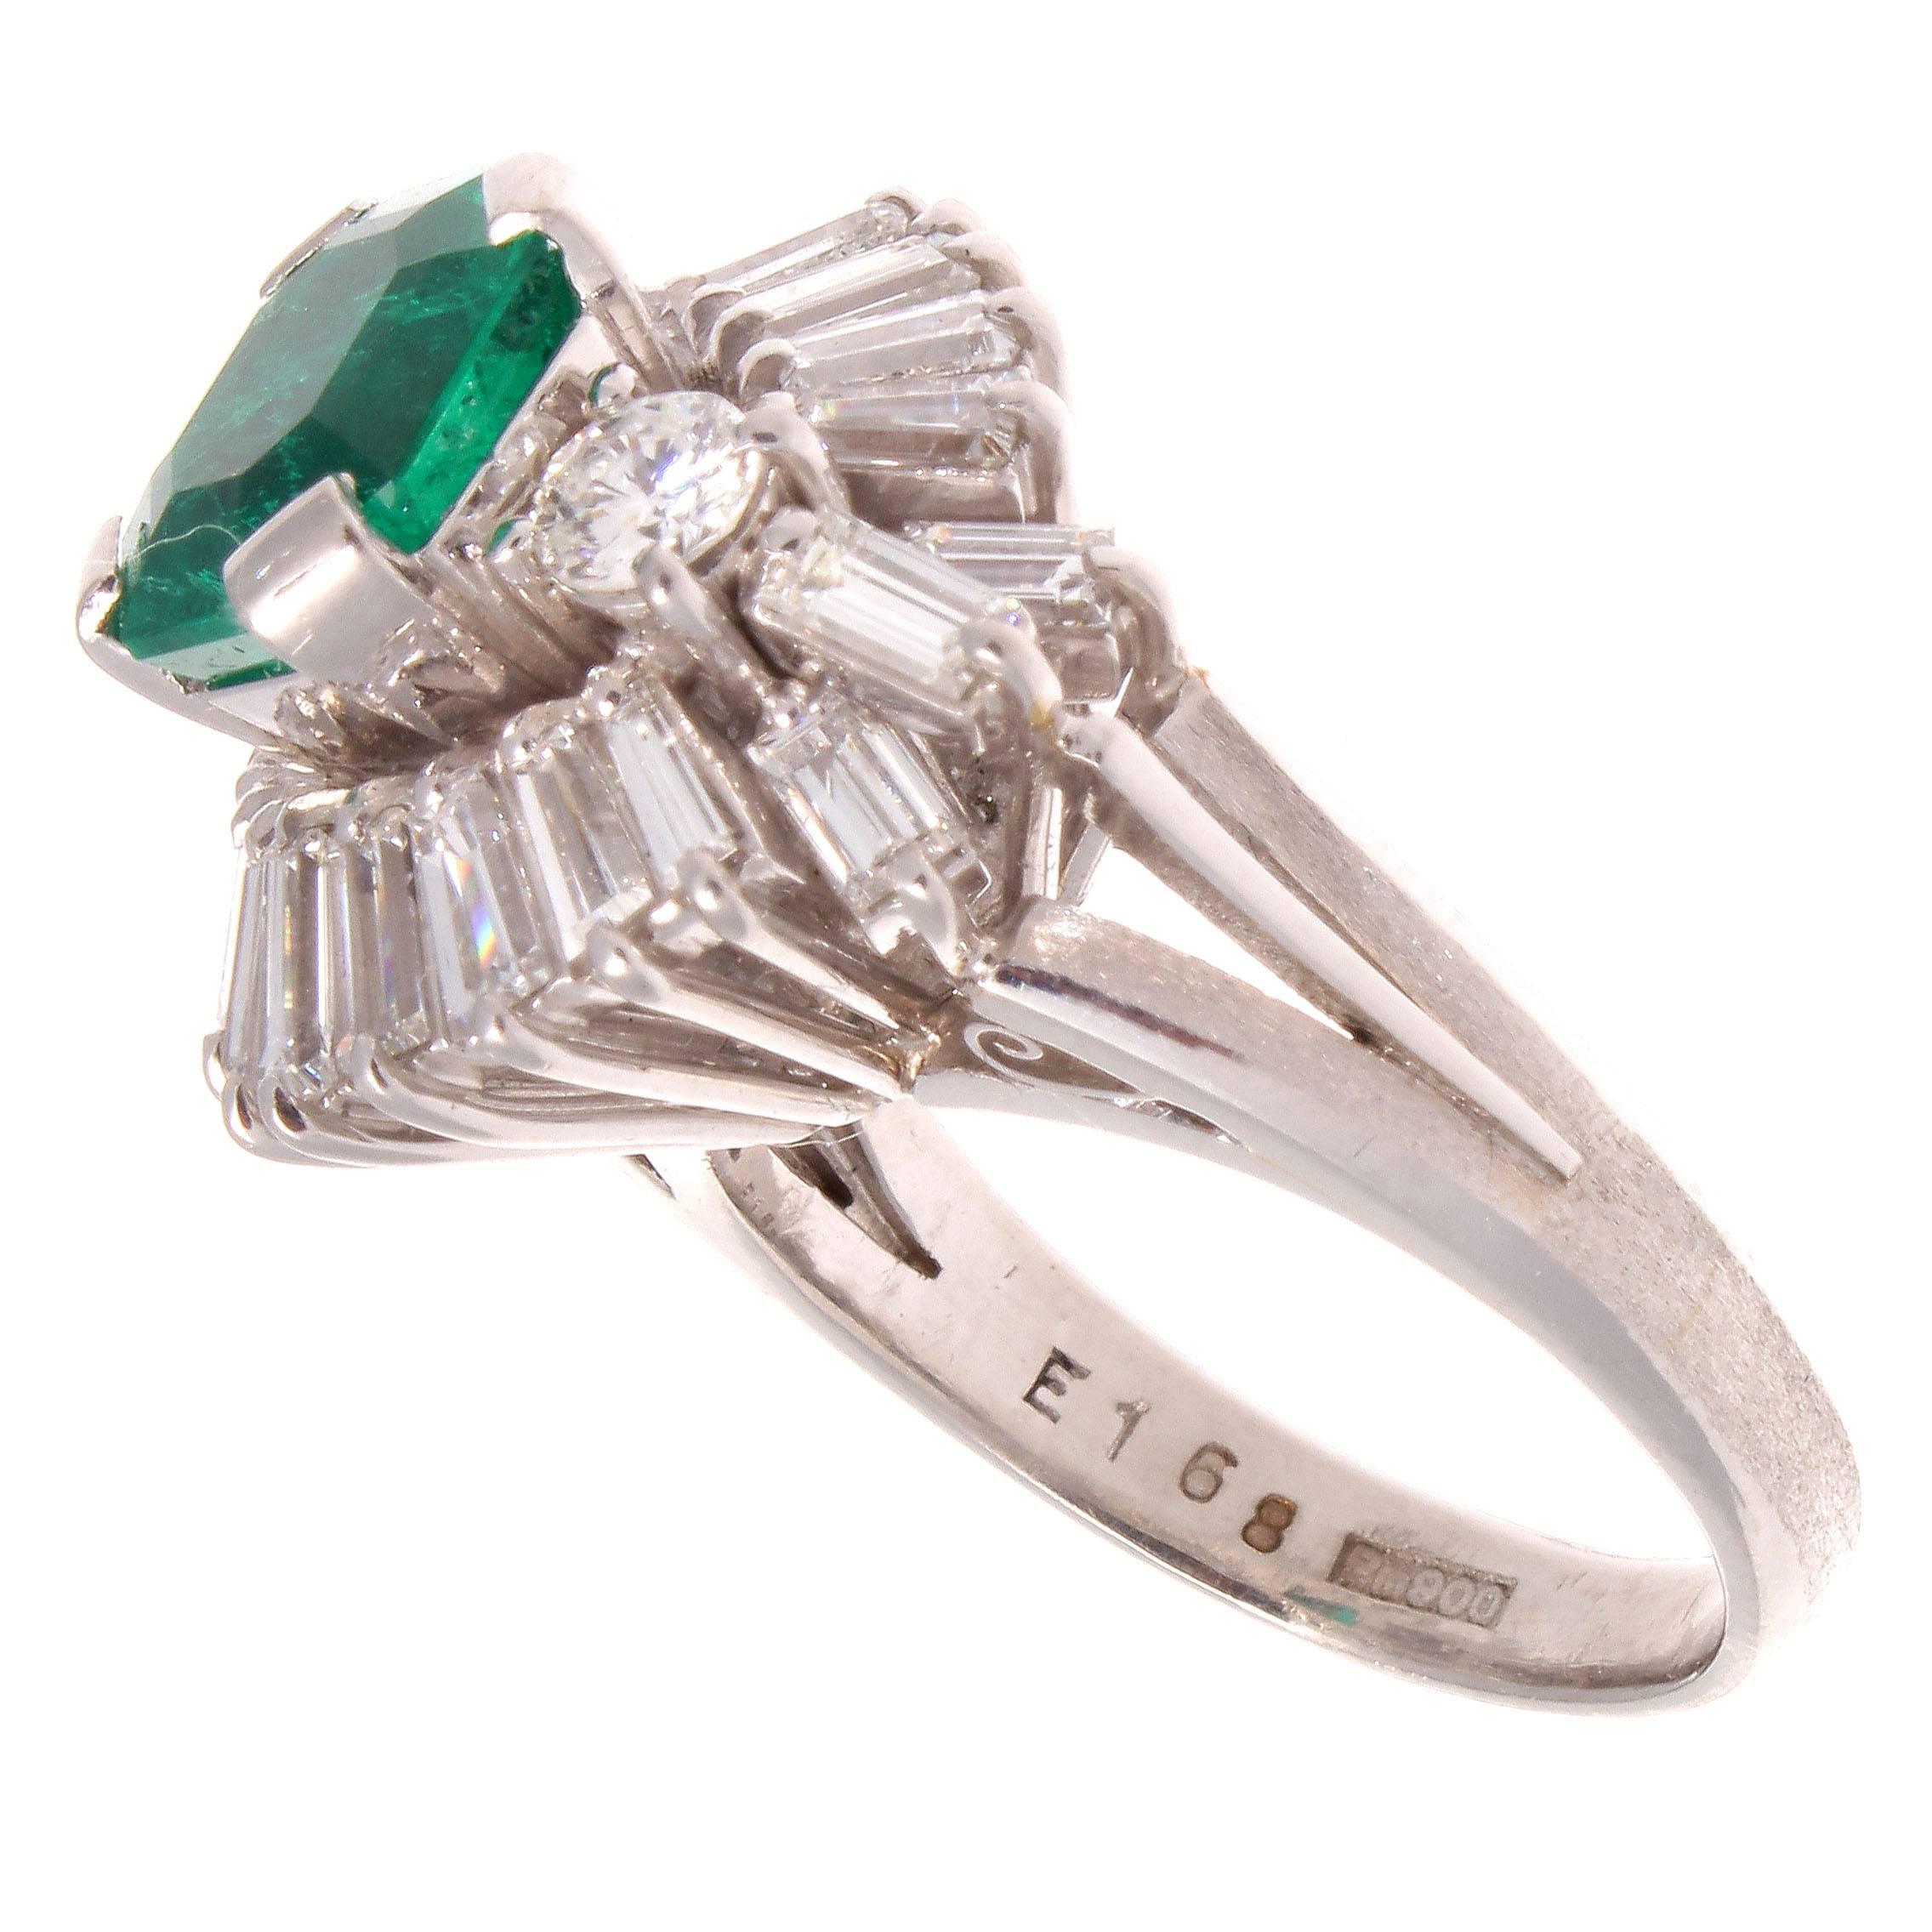 Featuring a bed of white diamonds weighing approximately 1.60 carats showcasing and highlighting the lively 1.68 carat forest green emerald. A dramatic ring and made of platinum.

Ring size 5 1/2 and may be re-sized to fit.